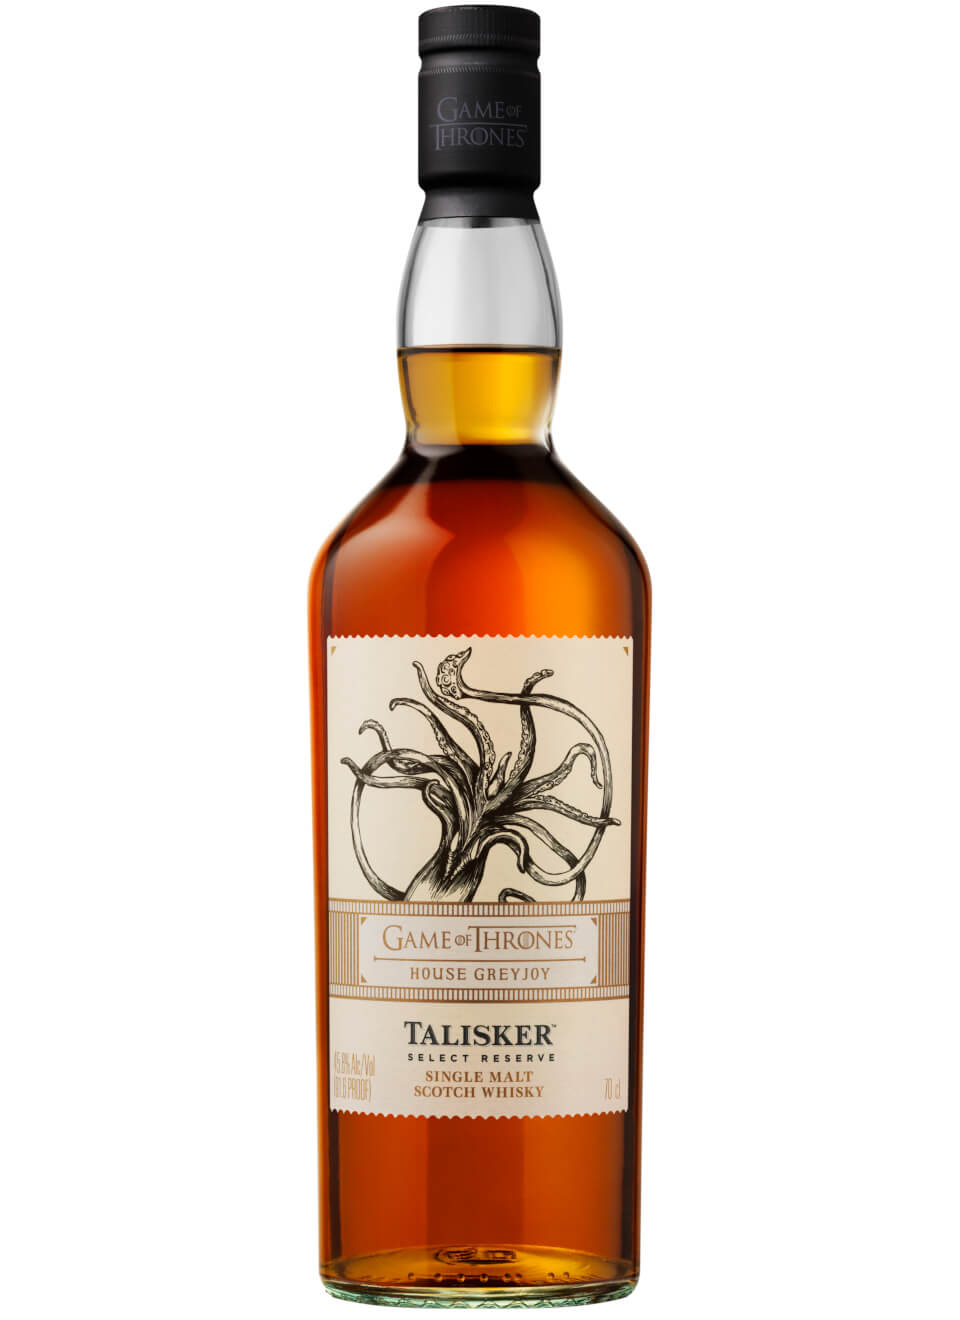 Talisker Select Reserve Game of Thrones Edition Whisky 0,7 L